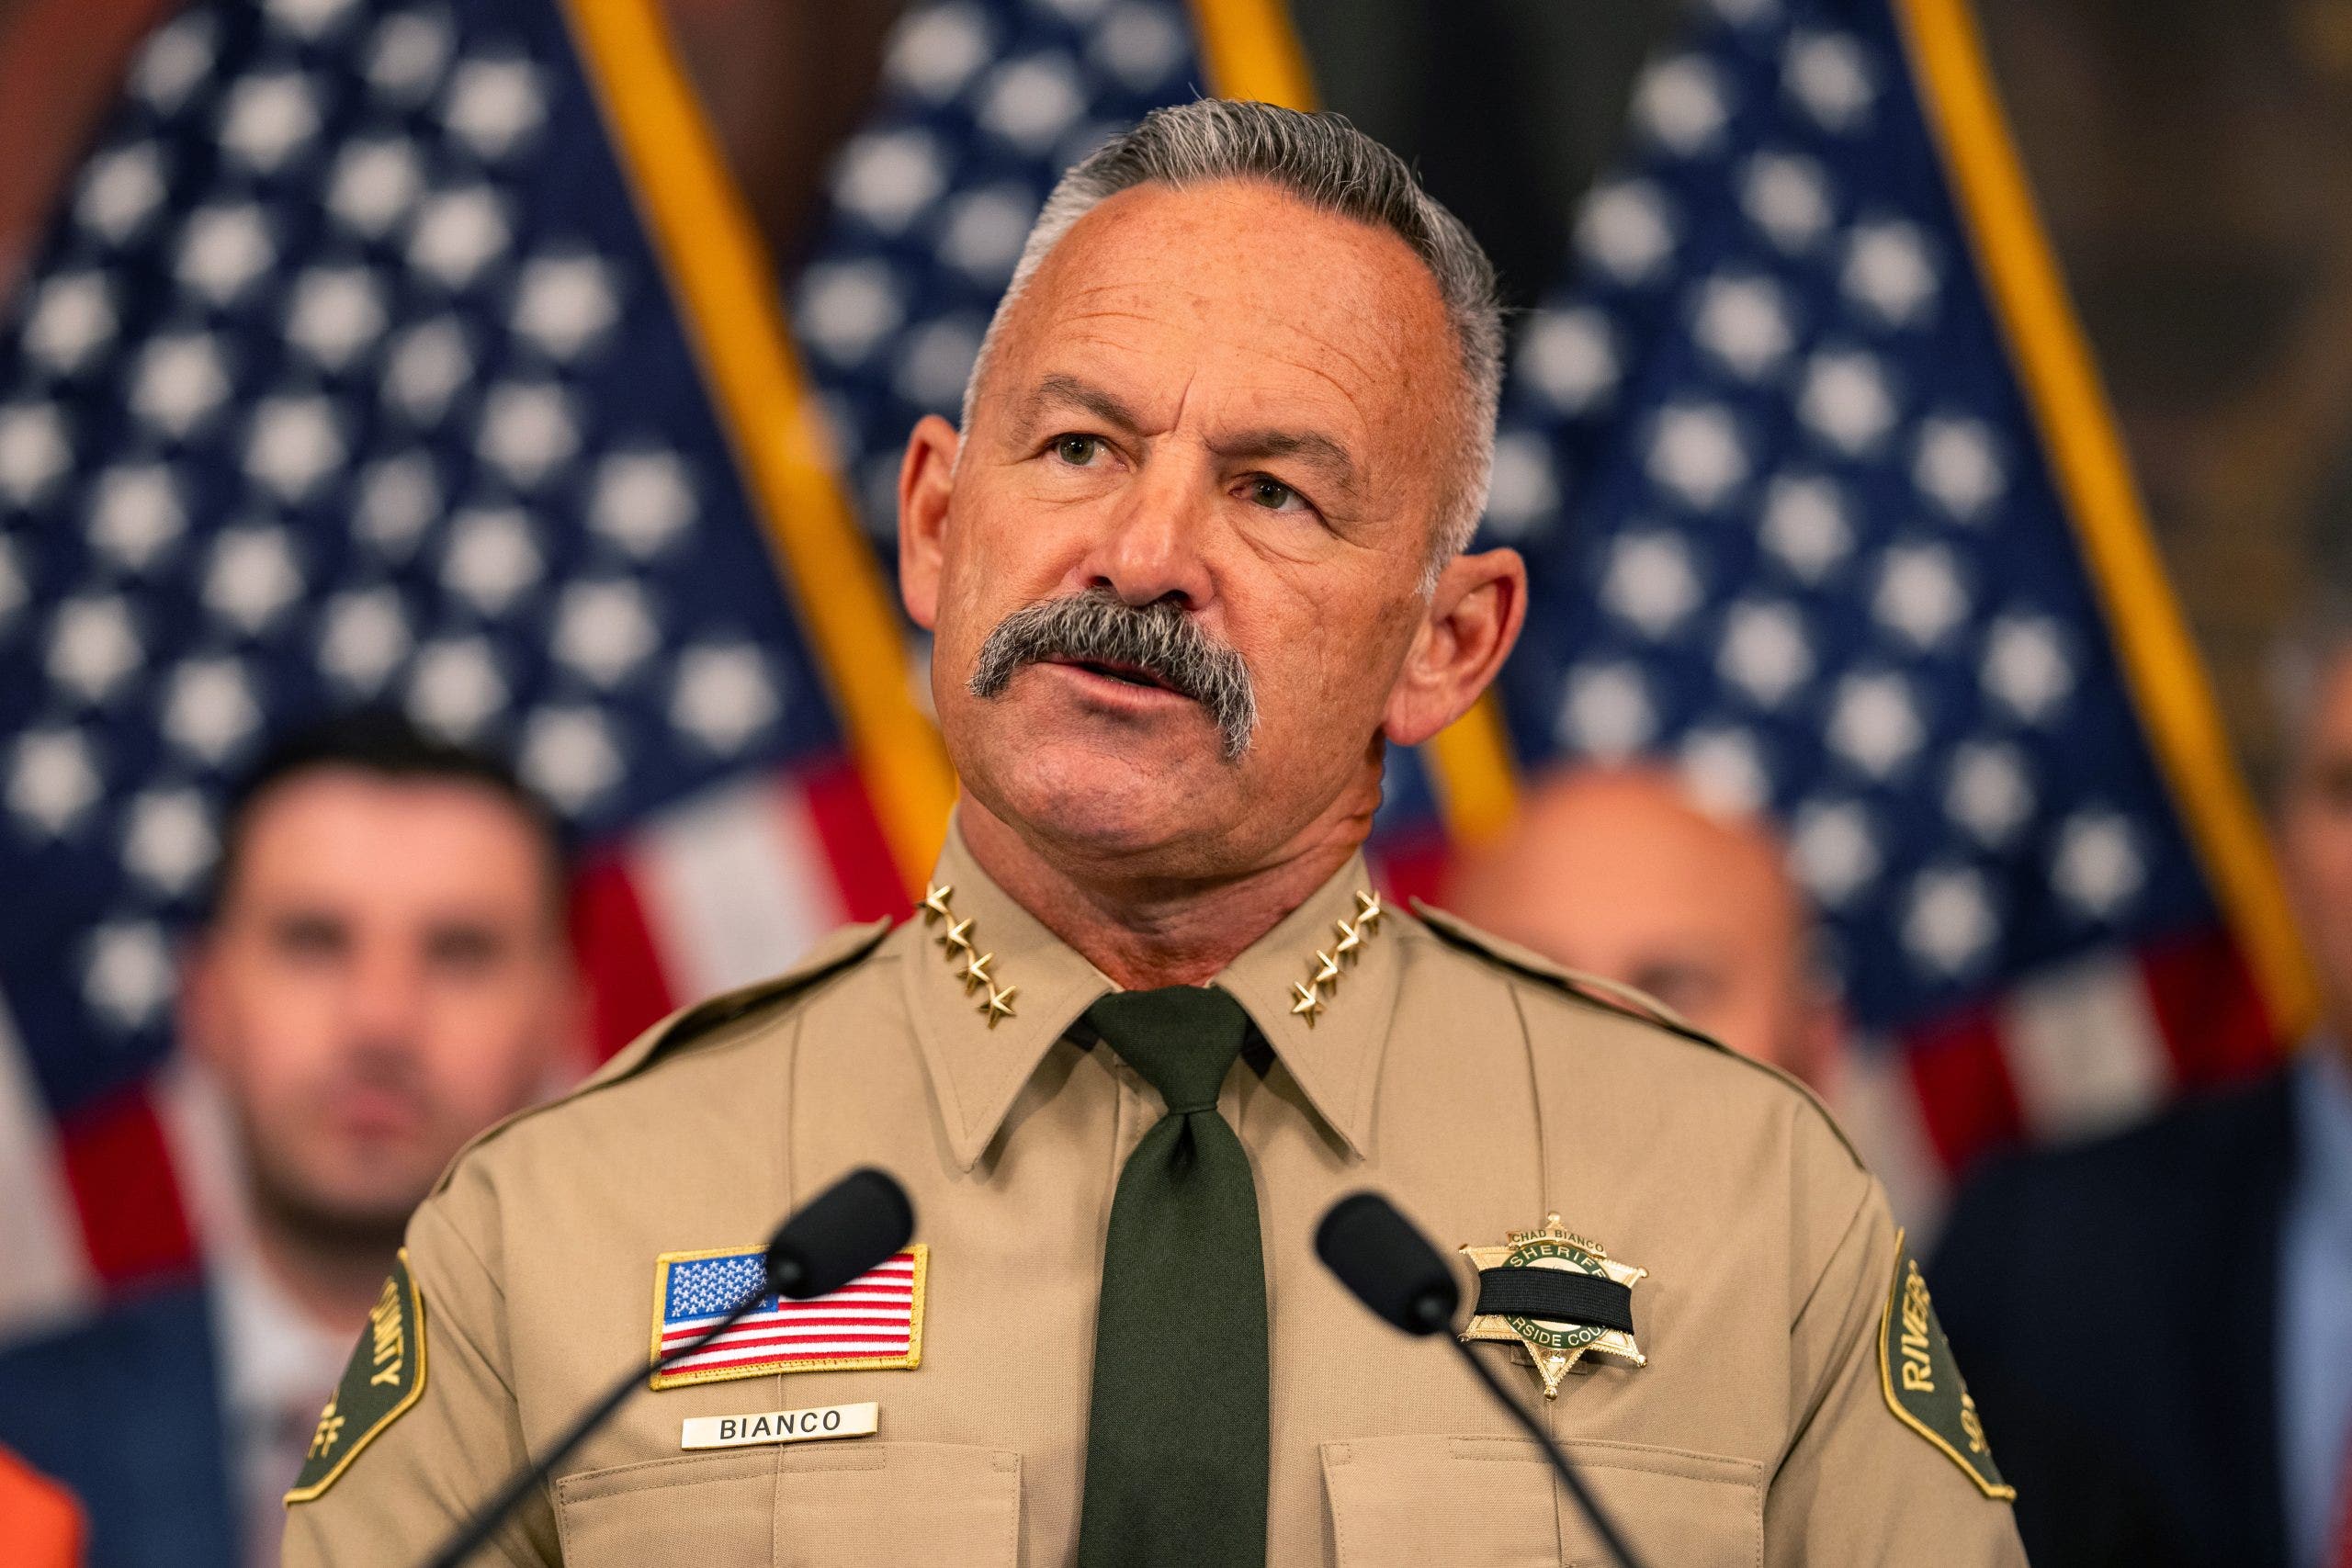 Blue state sheriff says he's 'changing teams' and urges support for Trump